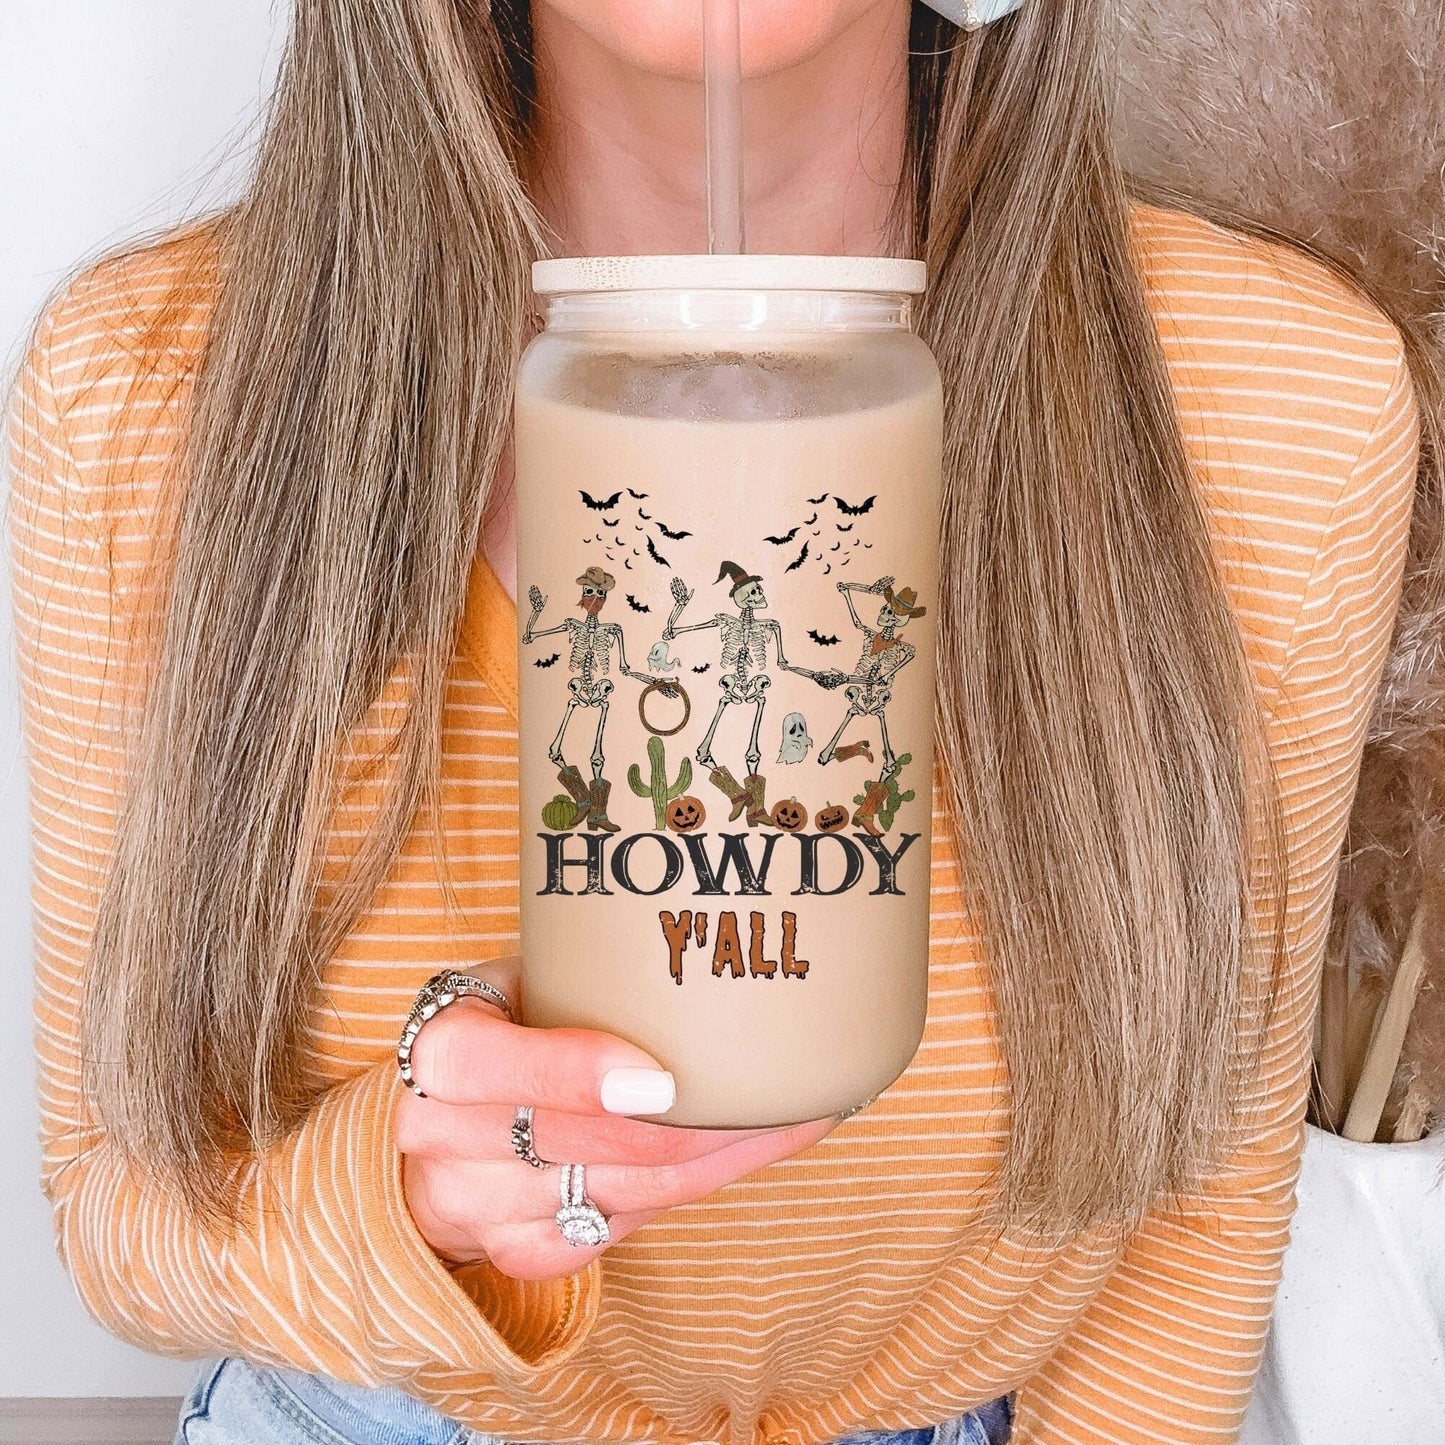 Howdy Y'all Cowboy Skeleton Frosted Iced Coffee Cup Funny Halloween Tumbler with Straw Dancing Skeletons 16oz beer Glass Can Tumbler Gift